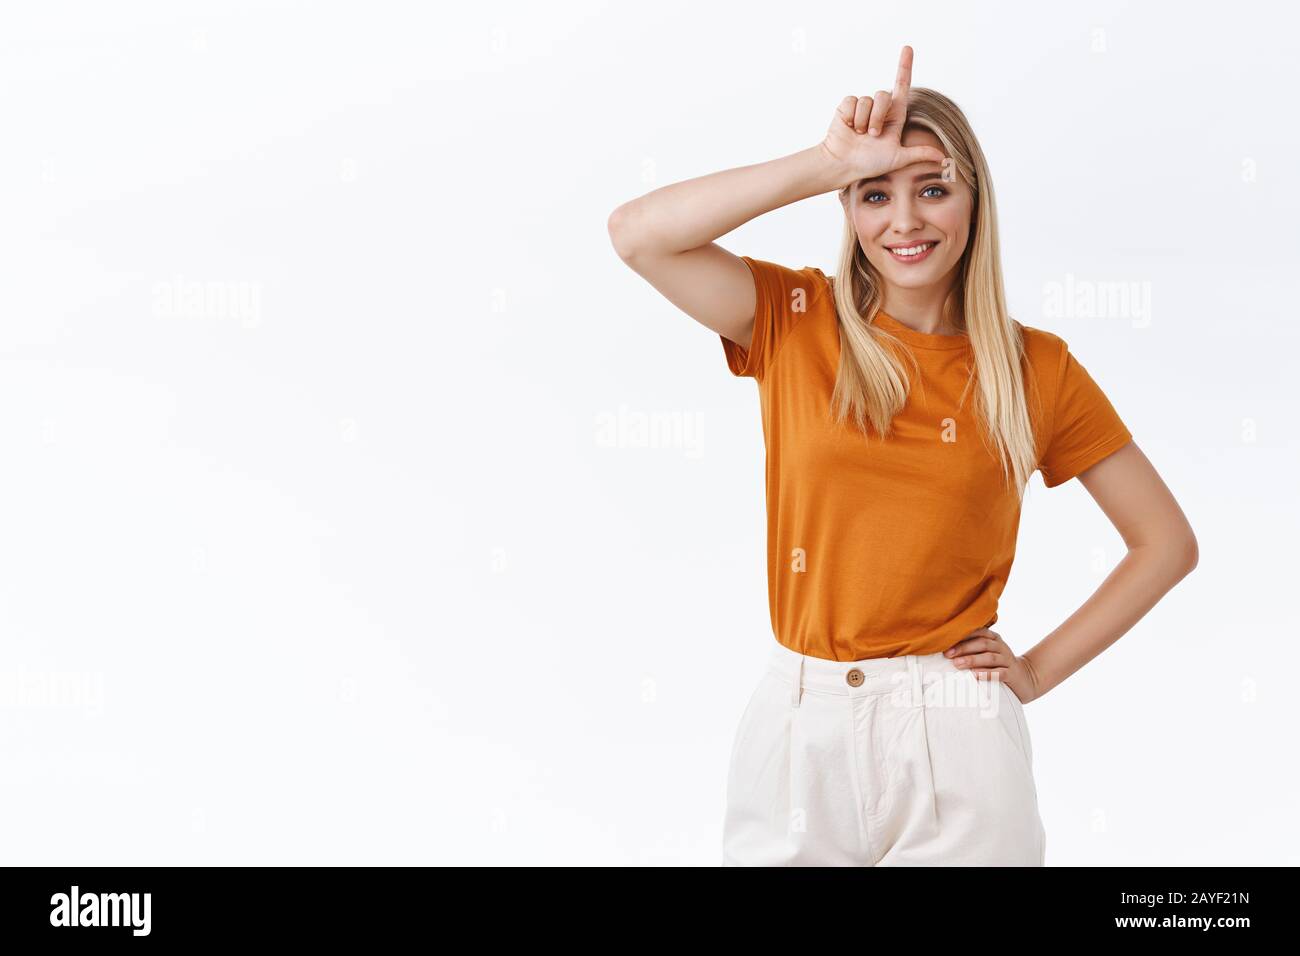 Snobbish good-looking careless, stylish modern blond woman in orange t-shirt with tattoo, hold hand on waist, show loser L word on forehead and Stock Photo